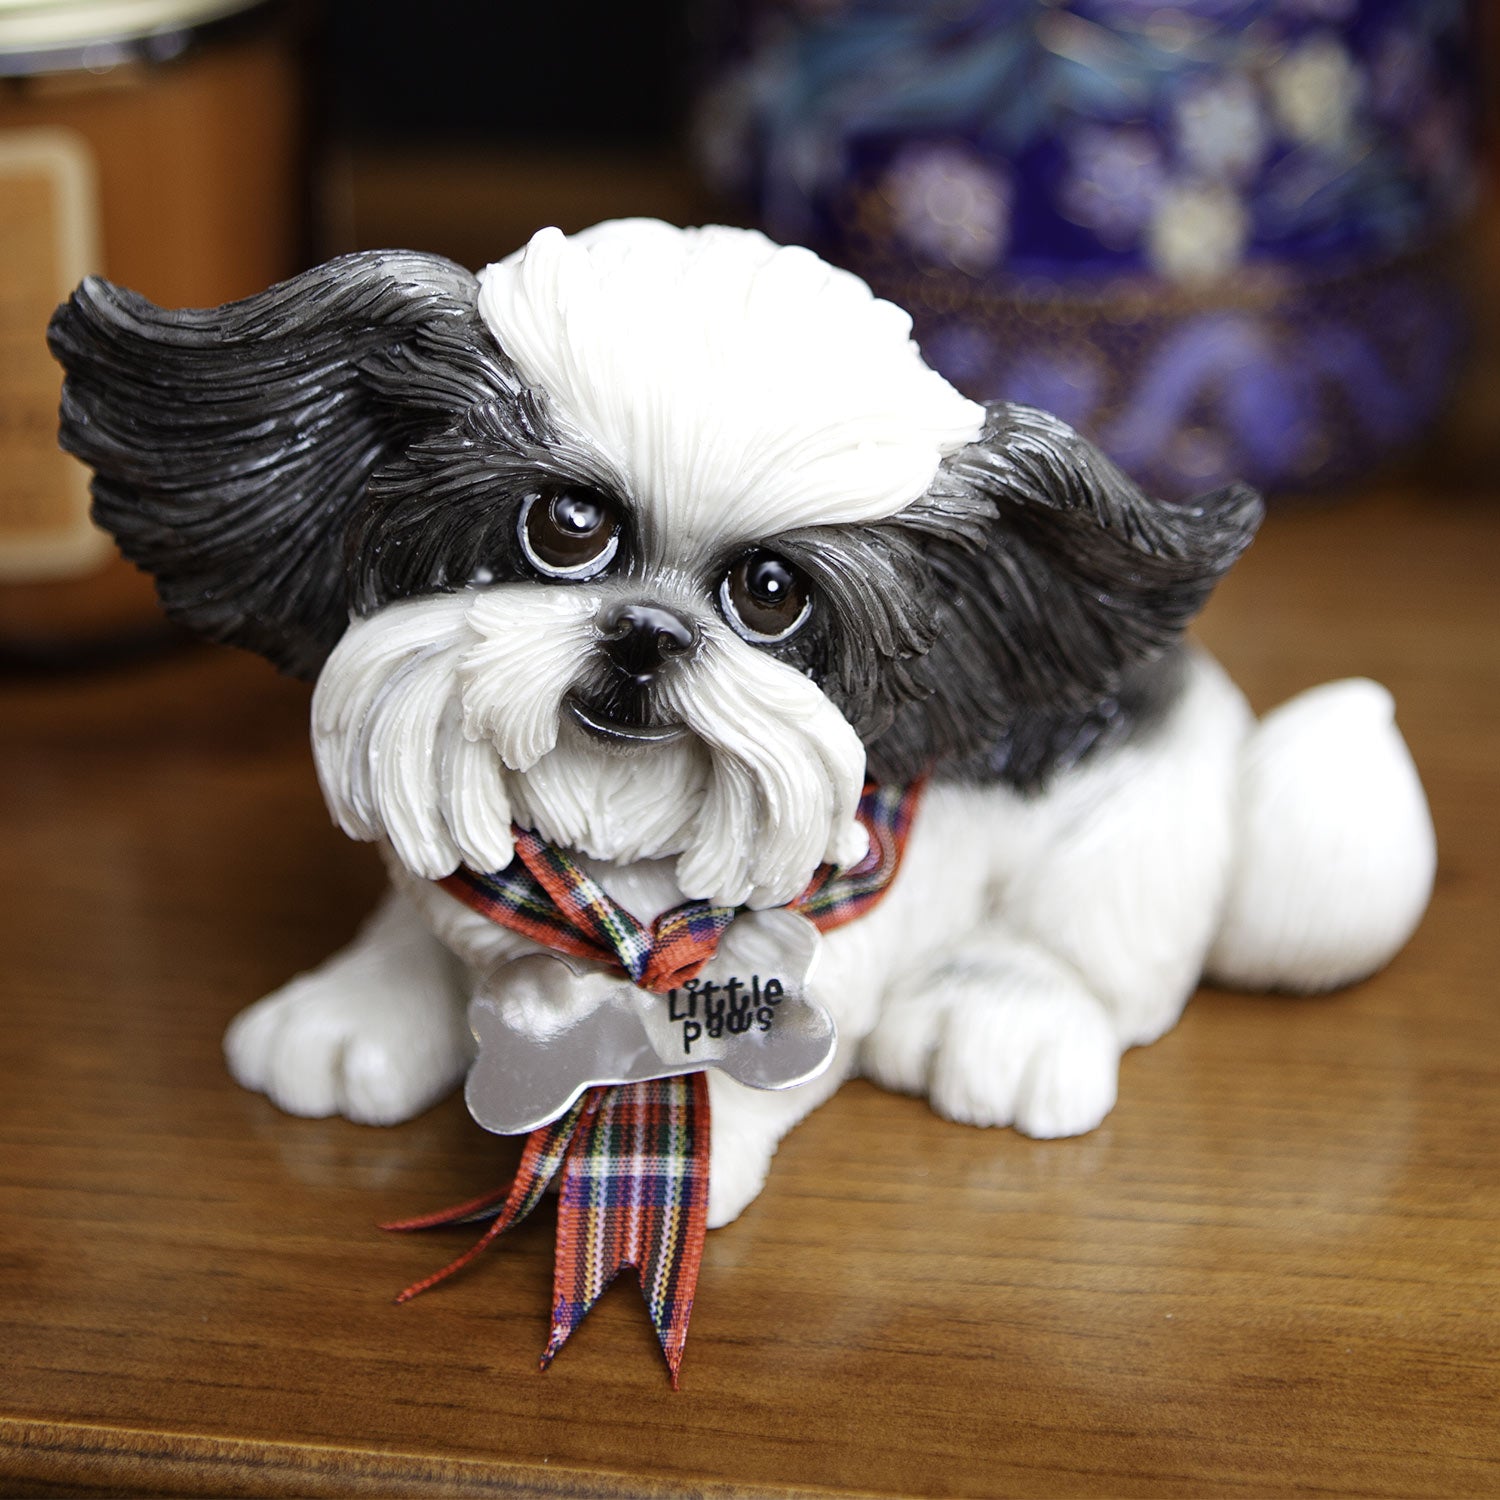 Dog Lover Gifts available at Dog Krazy Gifts - Oreo The Shi Tzu - part of the Little Paws range available from DogKrazyGifts.co.uk